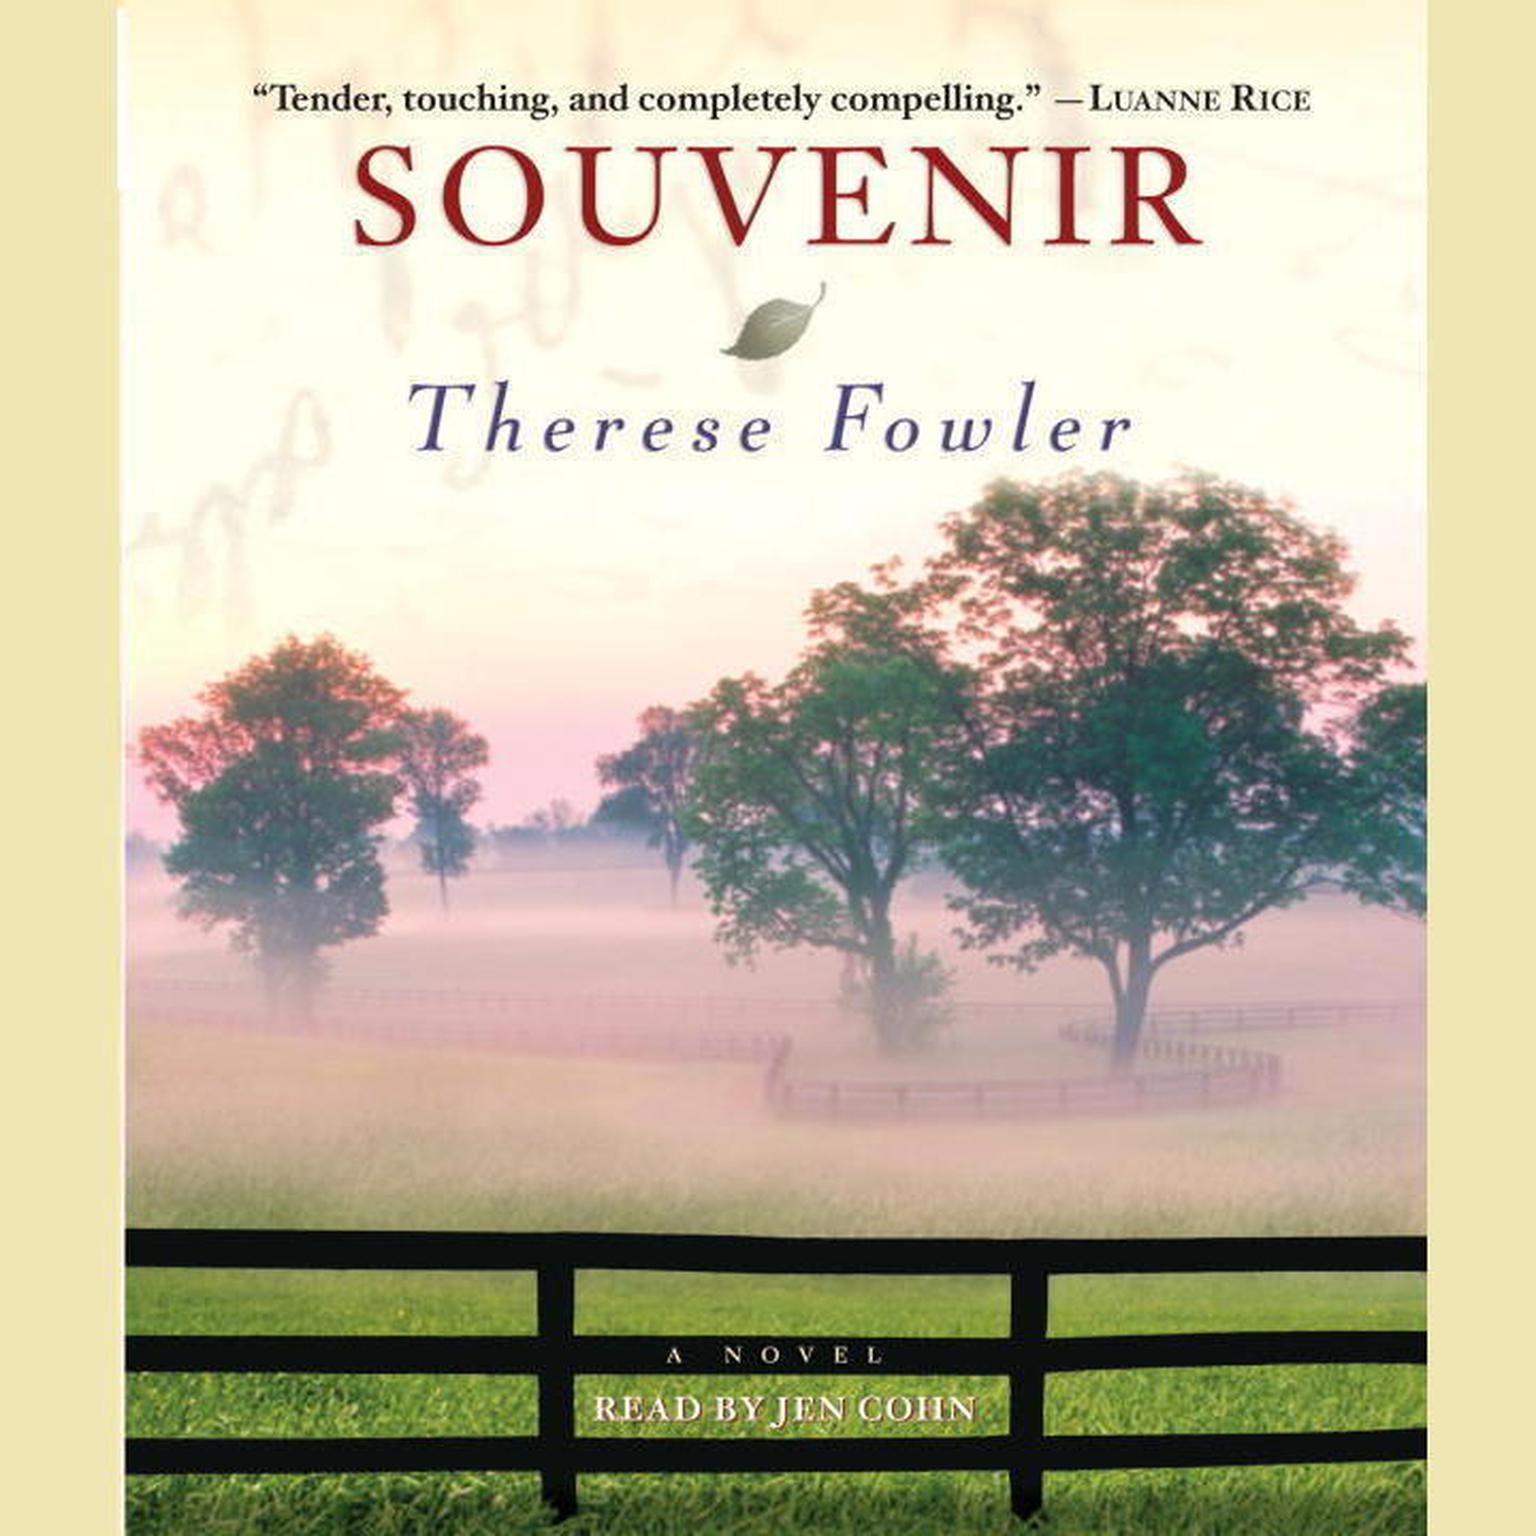 Souvenir (Abridged): A Novel Audiobook, by Therese Fowler